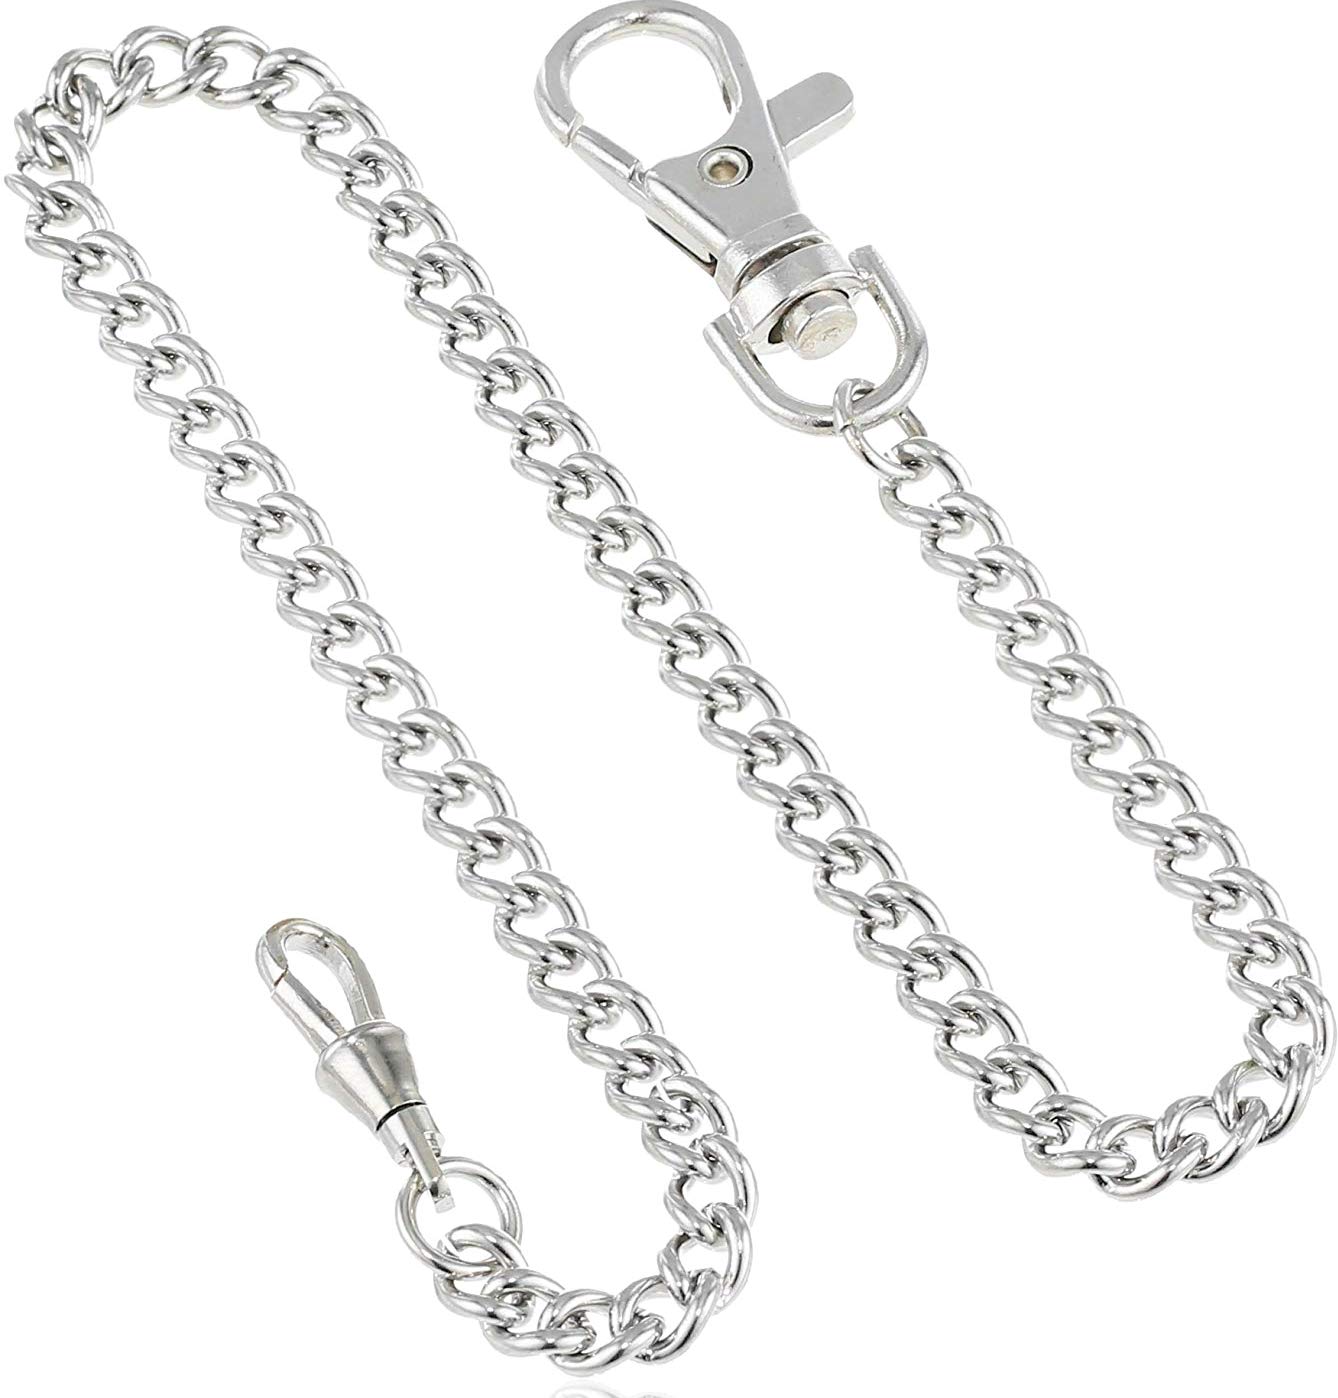 Dueber Stainless Steel Chrome Plated Pocket Watch Chain 3548-W